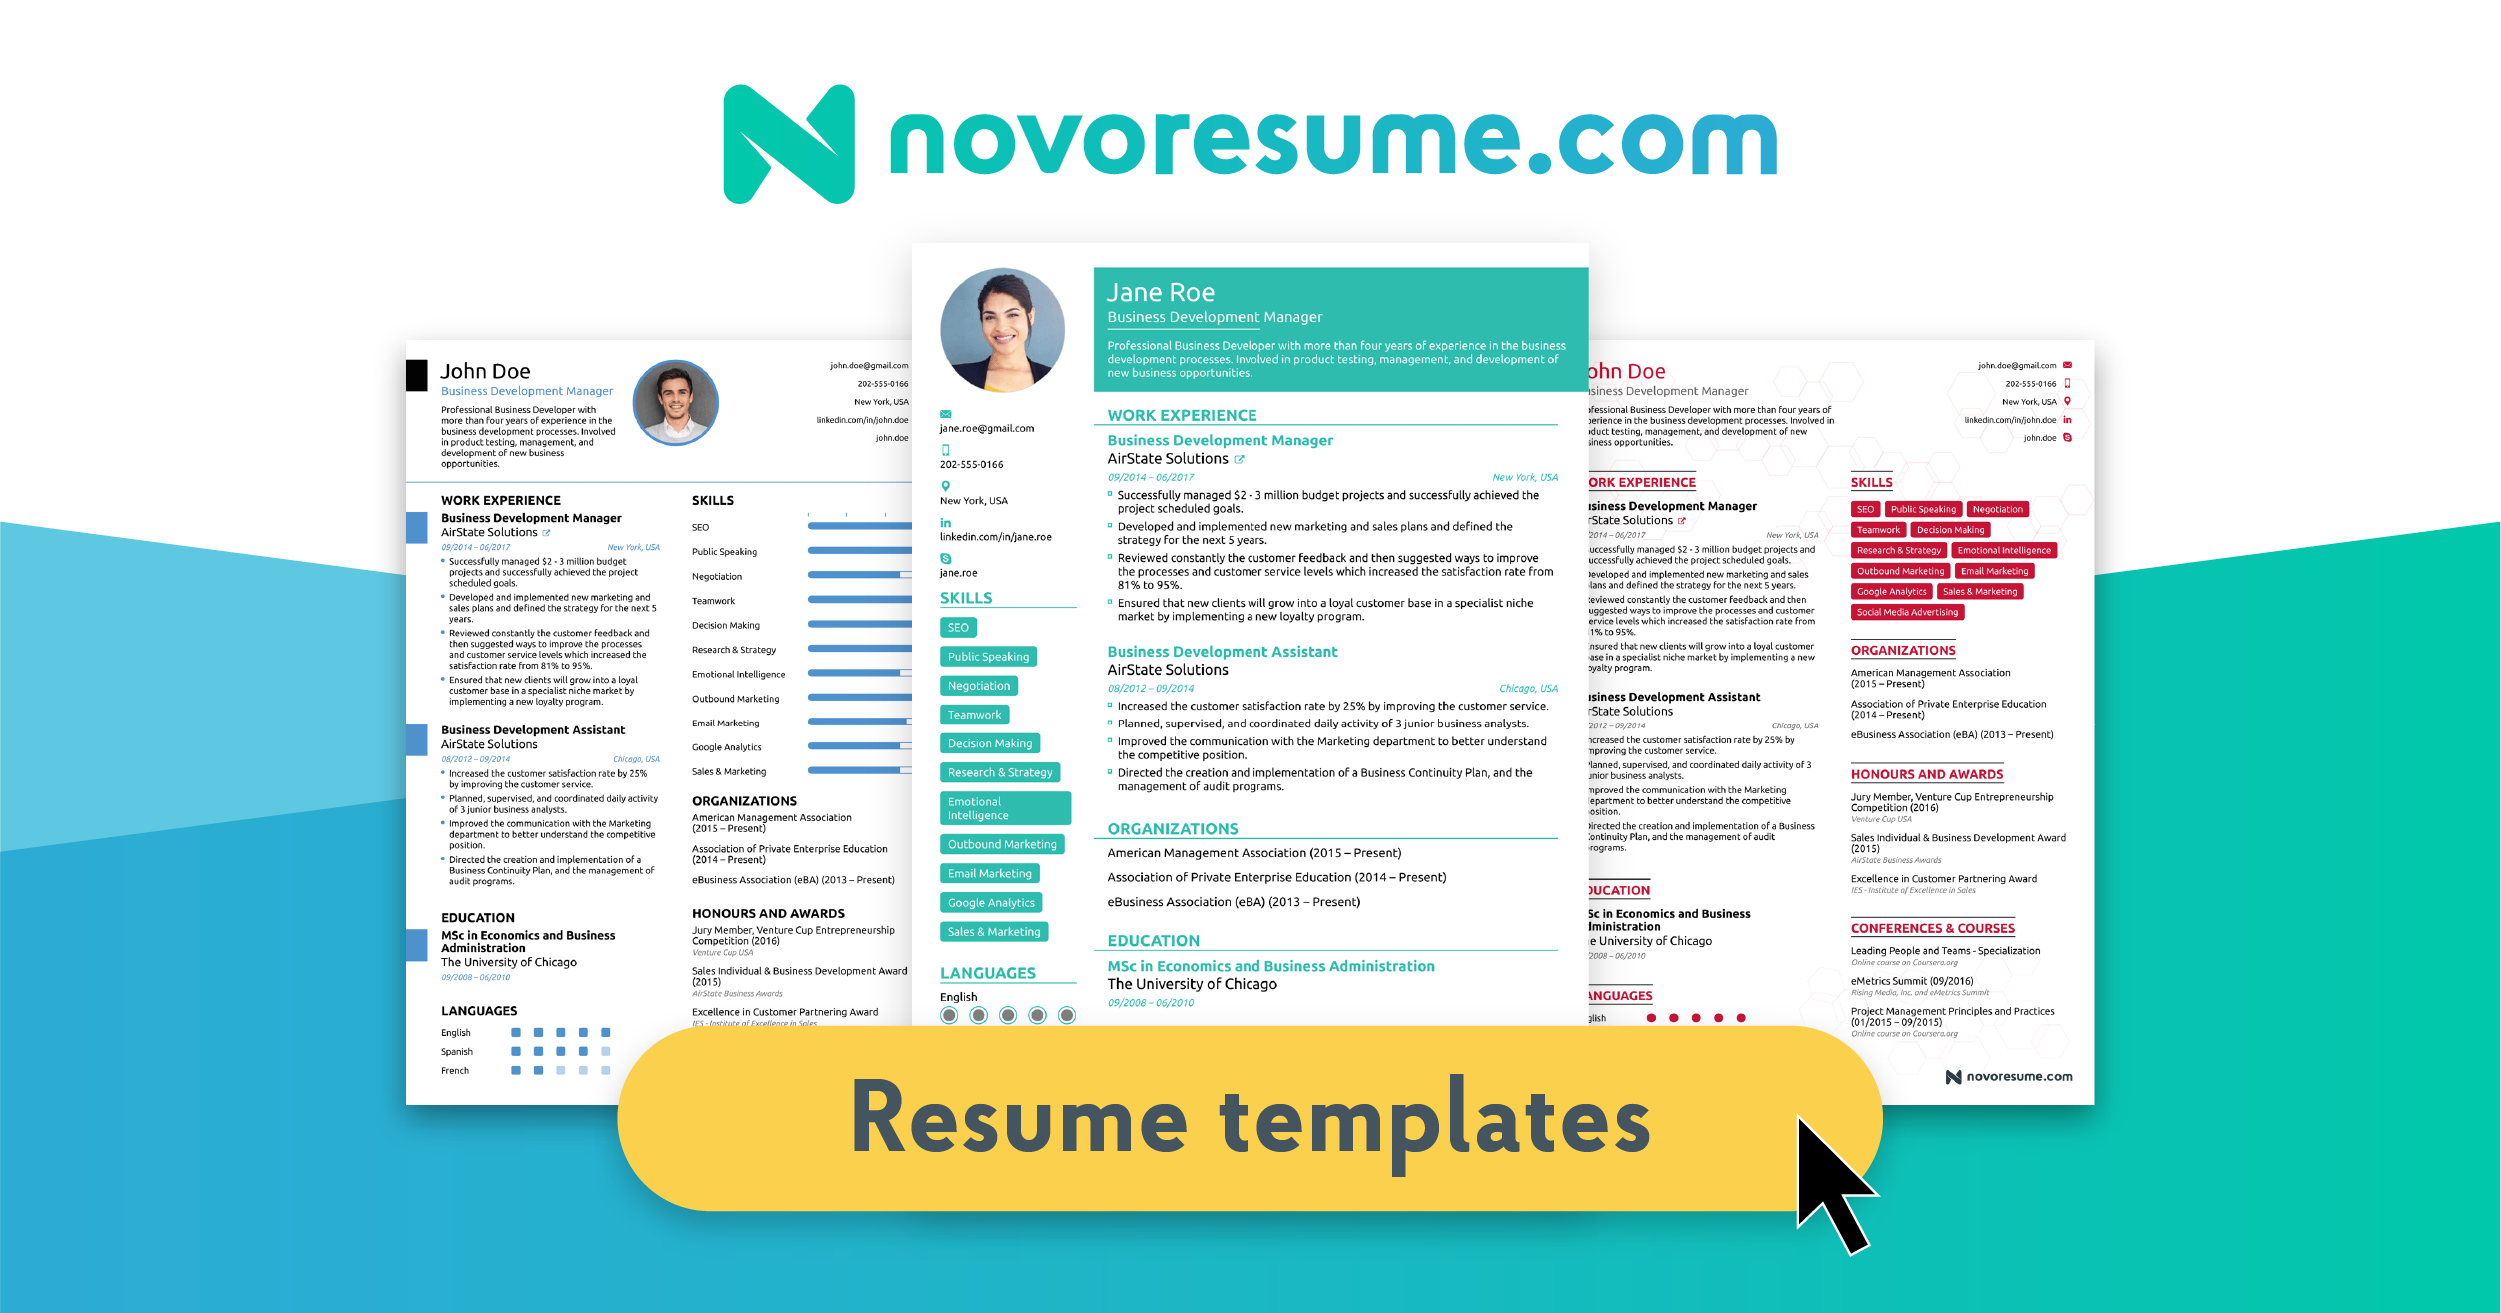 resume Data We Can All Learn From